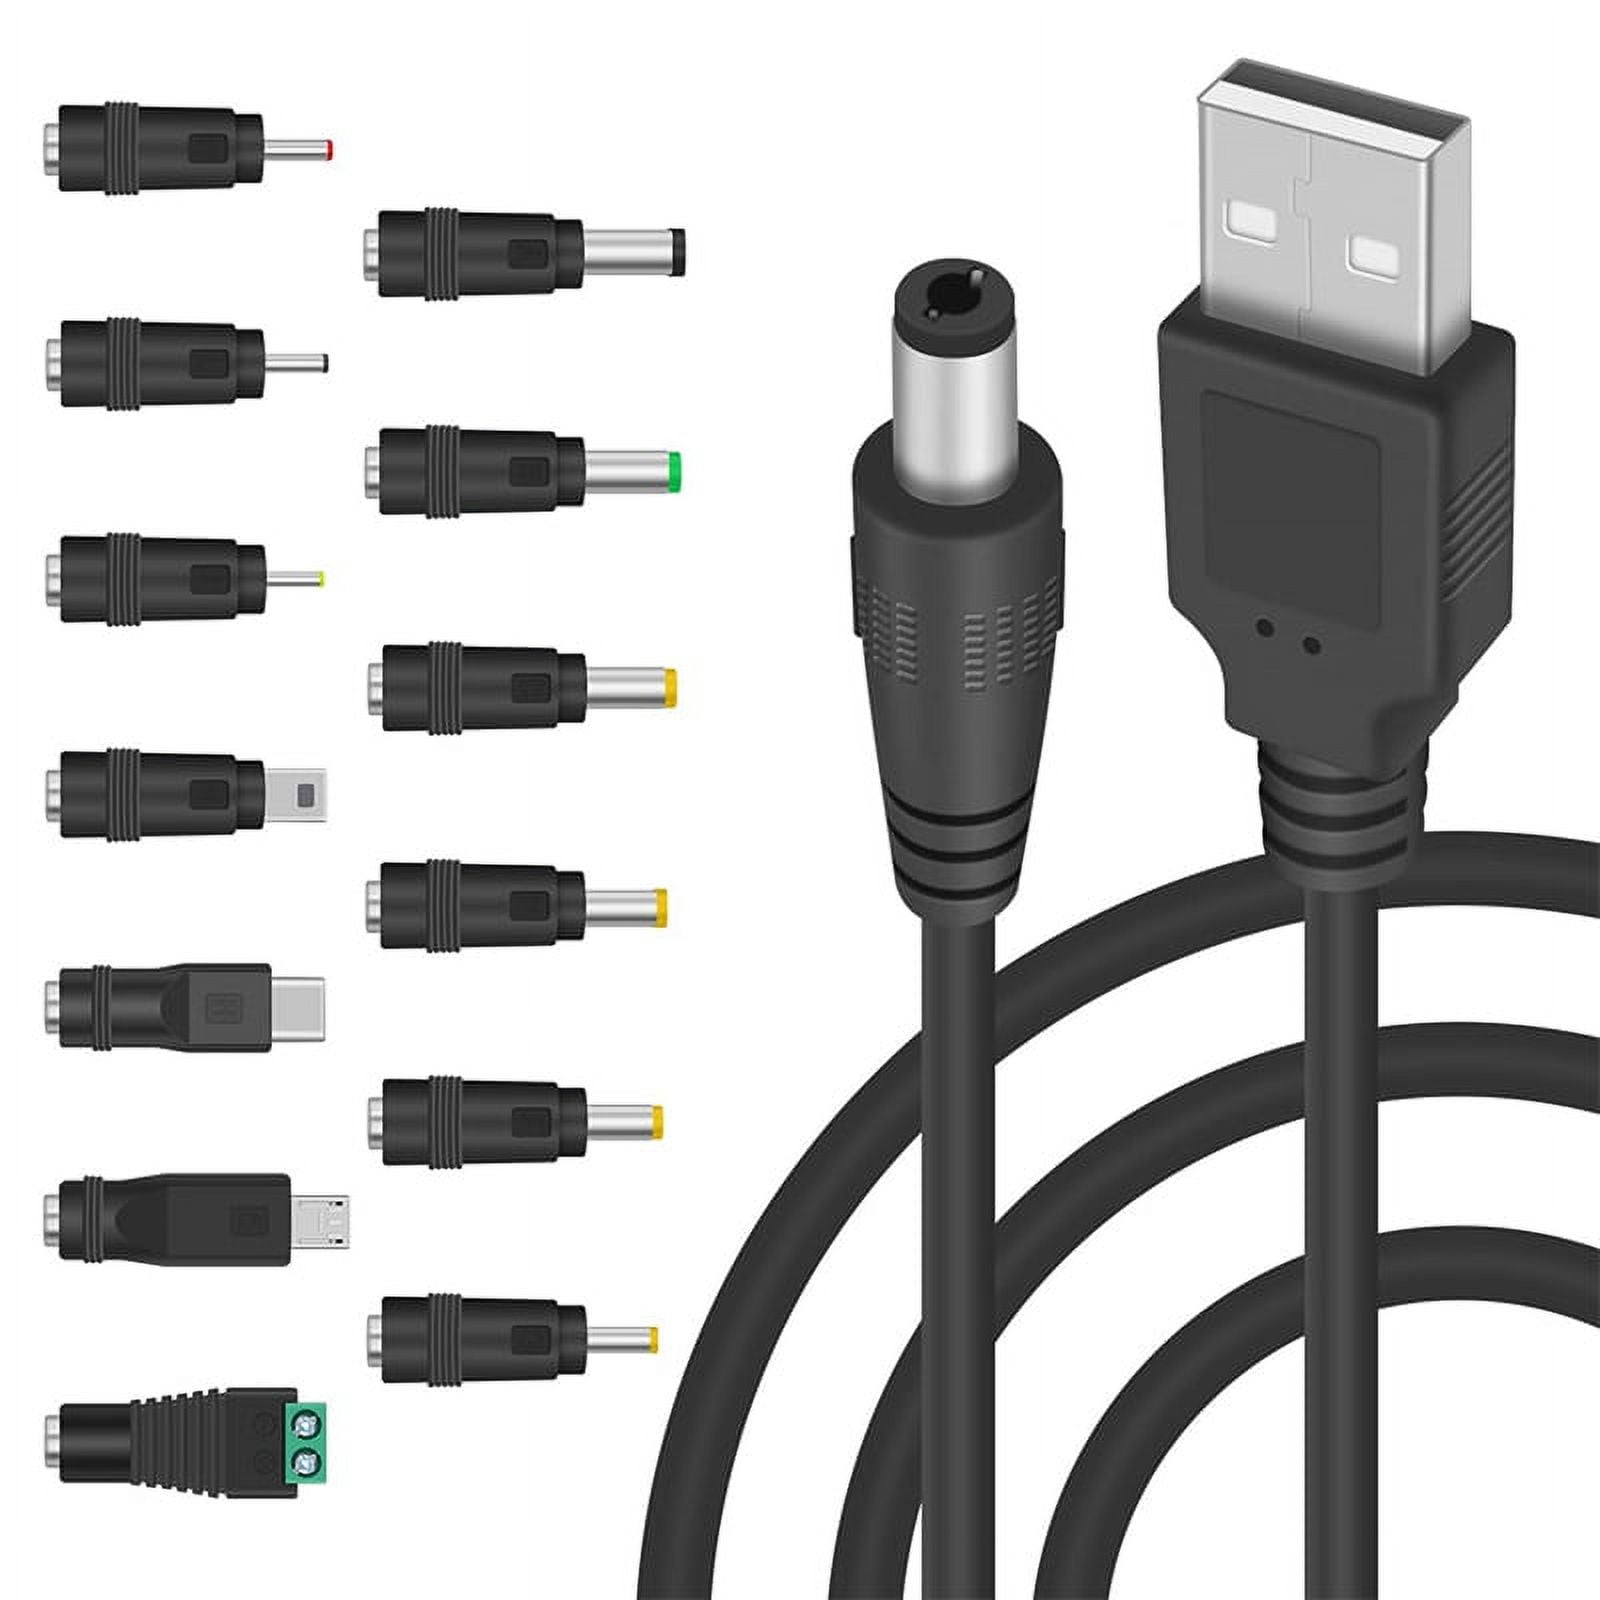 5V DC 5.5 2.1mm Jack Charging Cable Power Cord, USB to DC Power Cable with 13 Interchangeable Plugs Connectors Adapters, Black